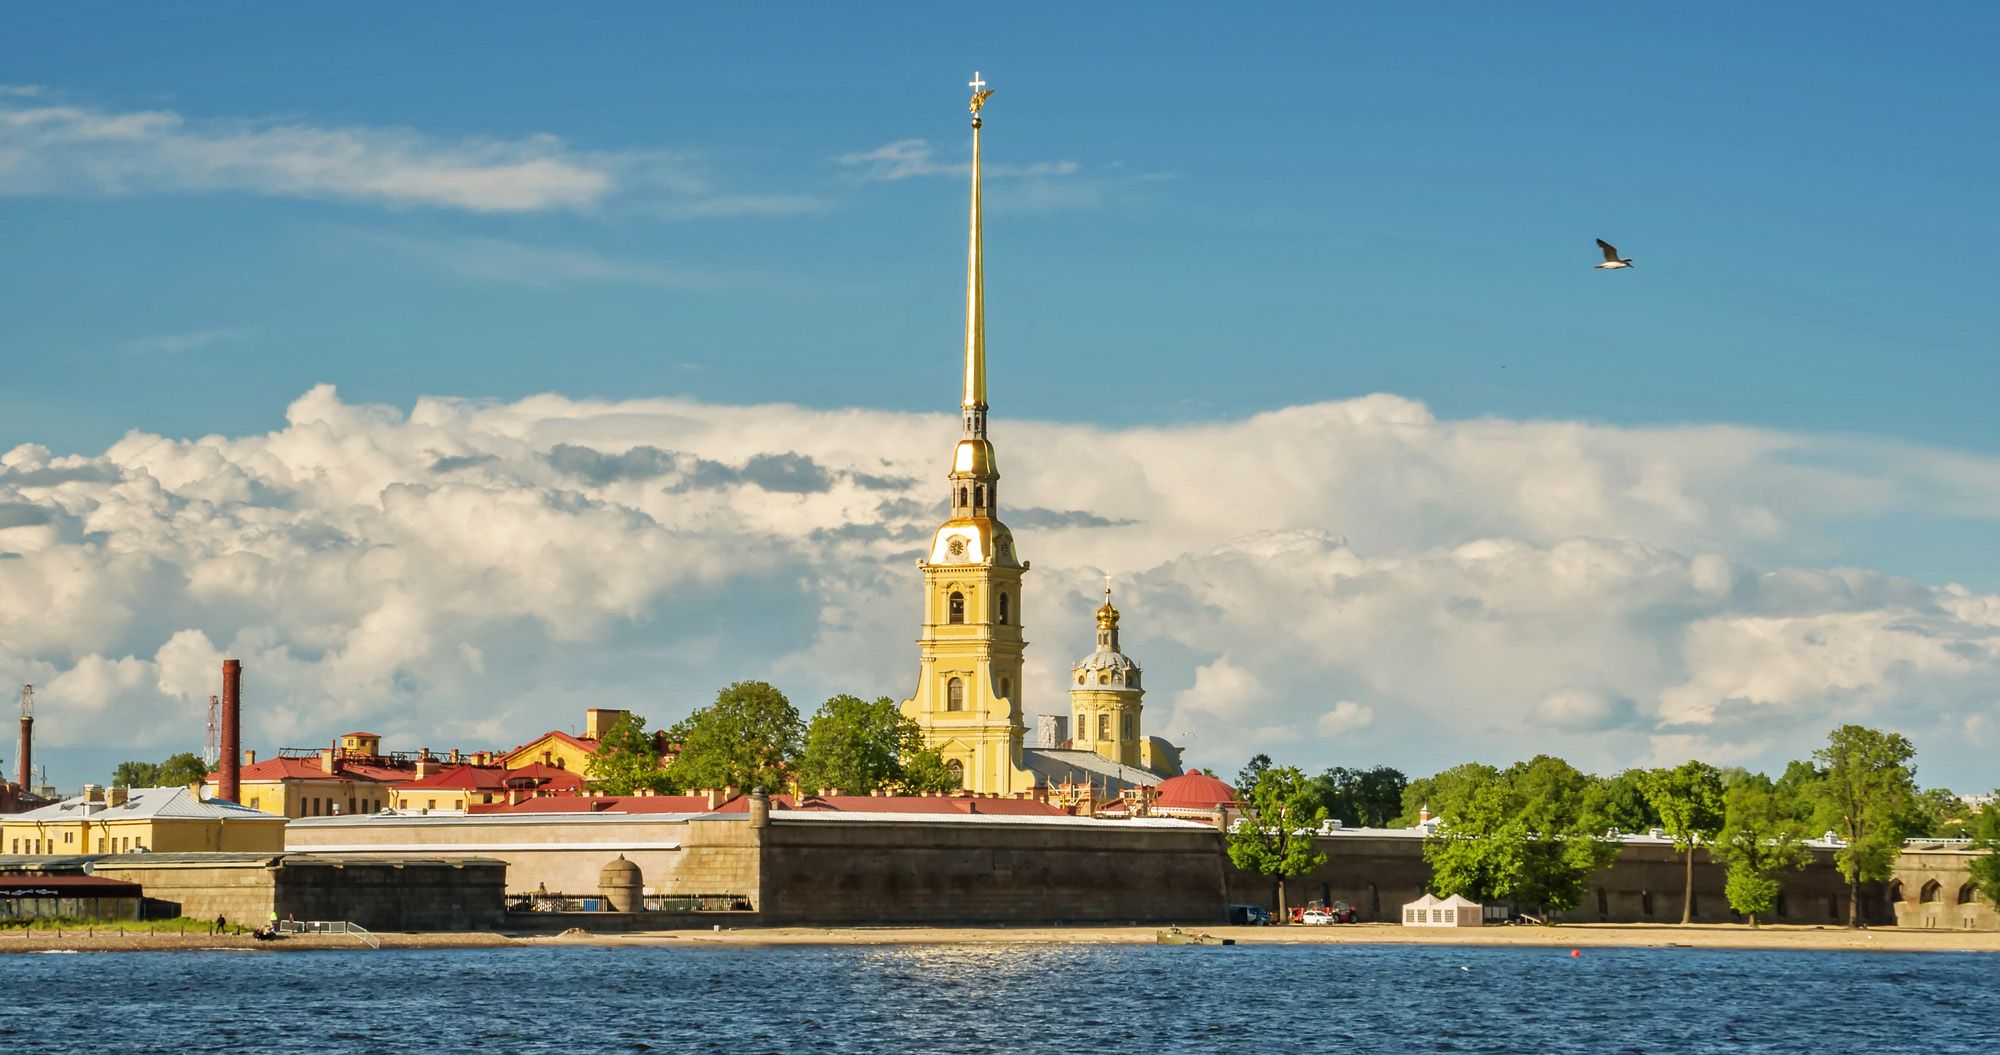 St. Petersburg. Peter and Paul Fortress